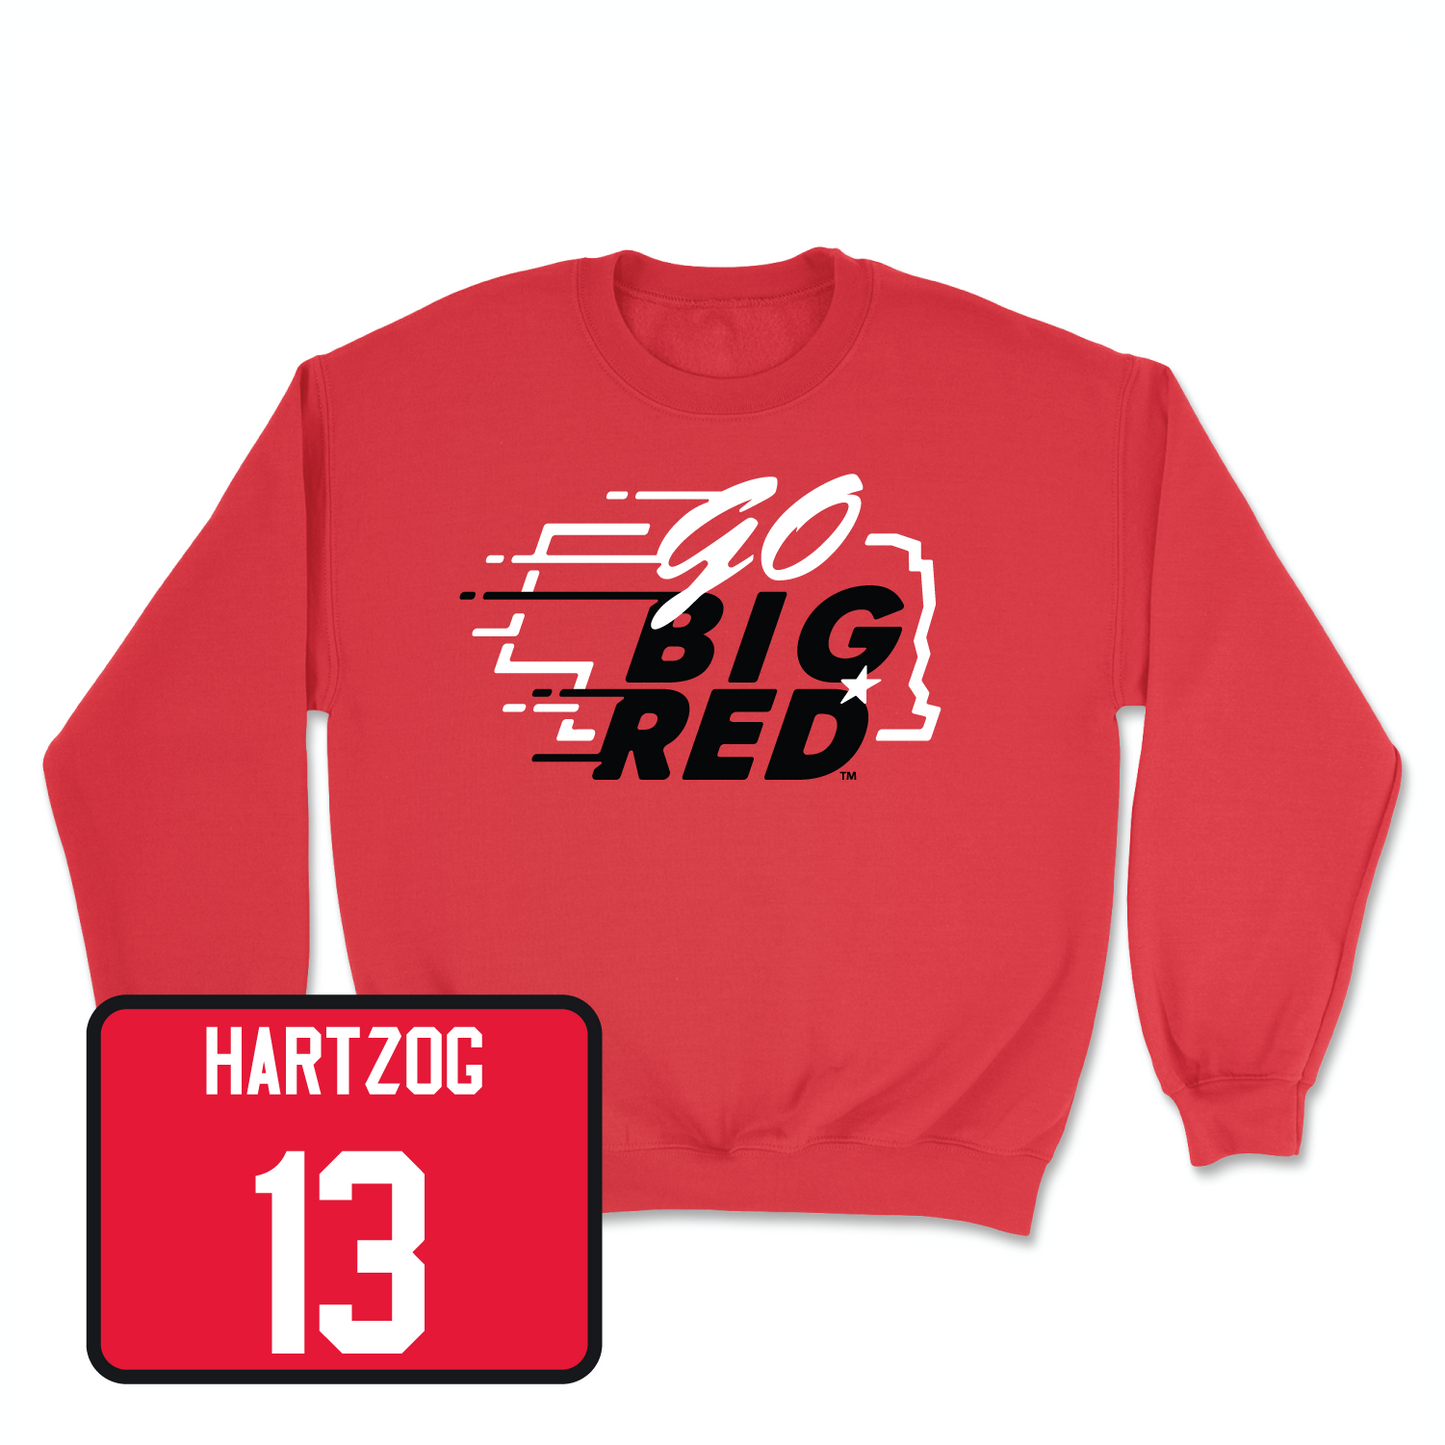 Red Football GBR Crew 2 X-Large / Malcolm Hartzog | #13